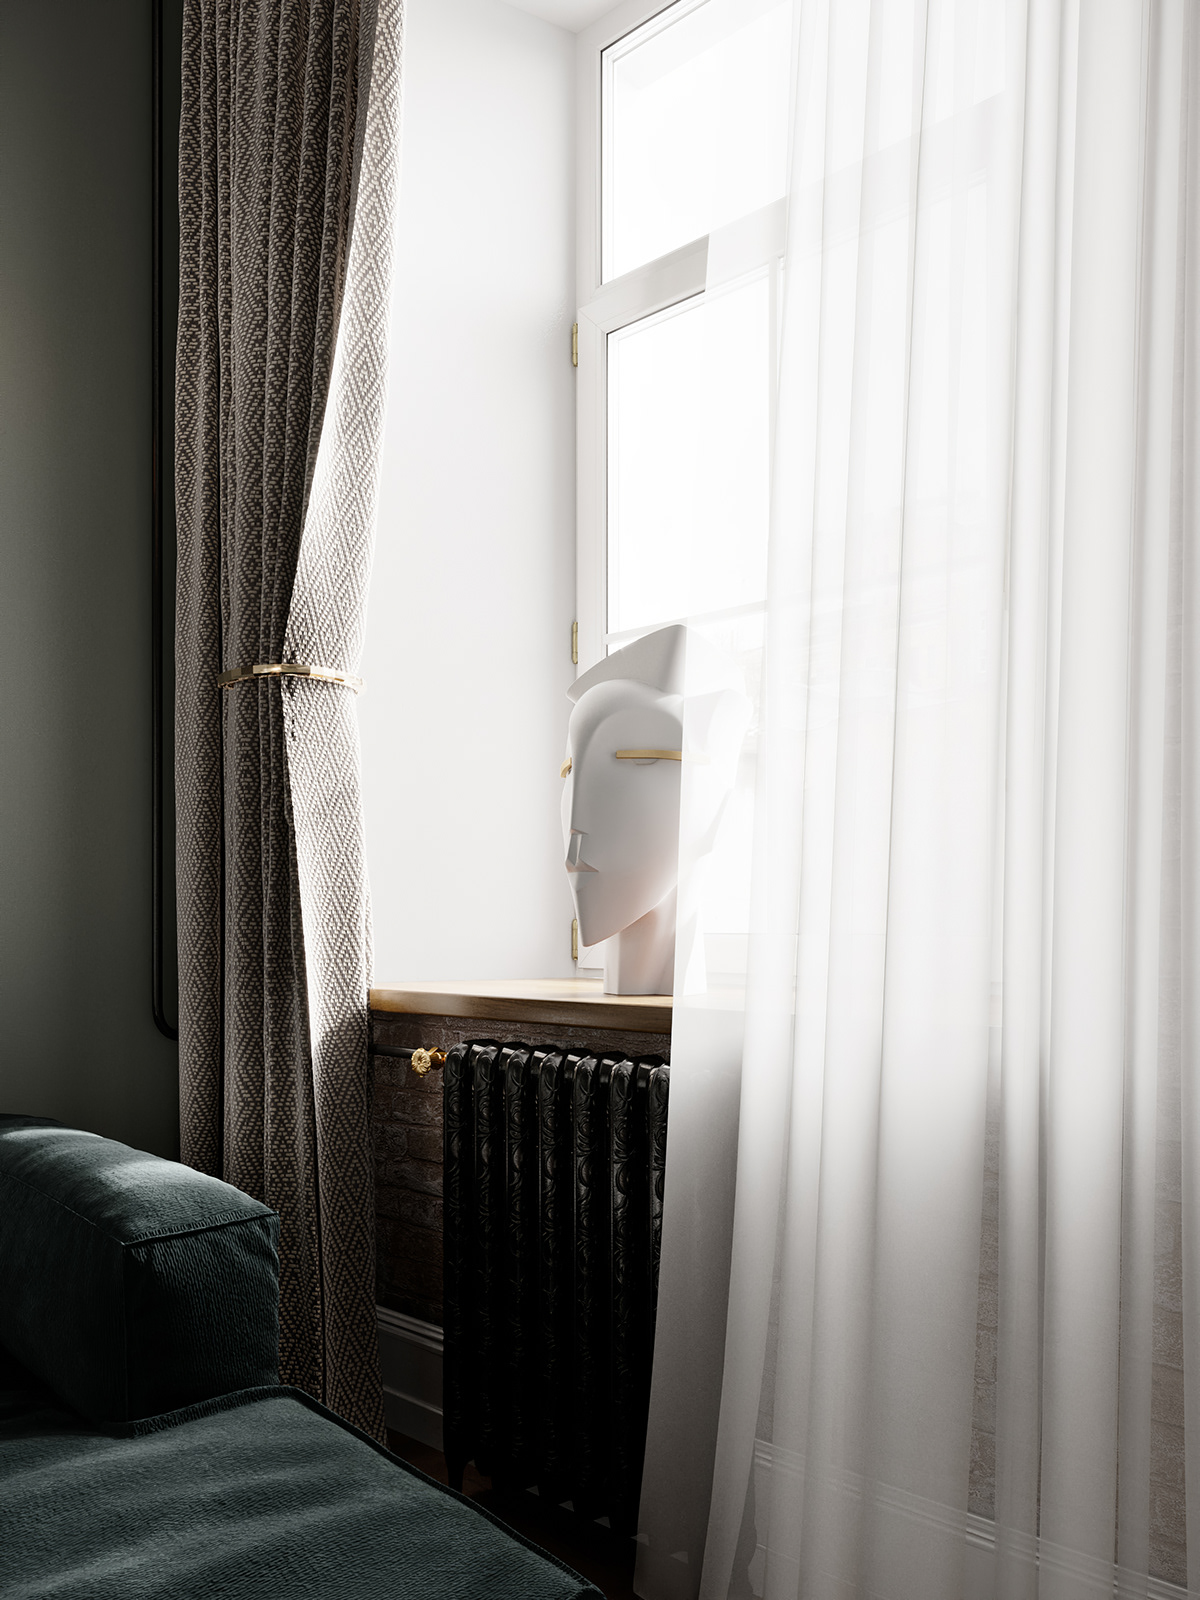 Curtains in gentle colors and high-quality materials that allow natural light to pass through easily, bringing light and positive energy.